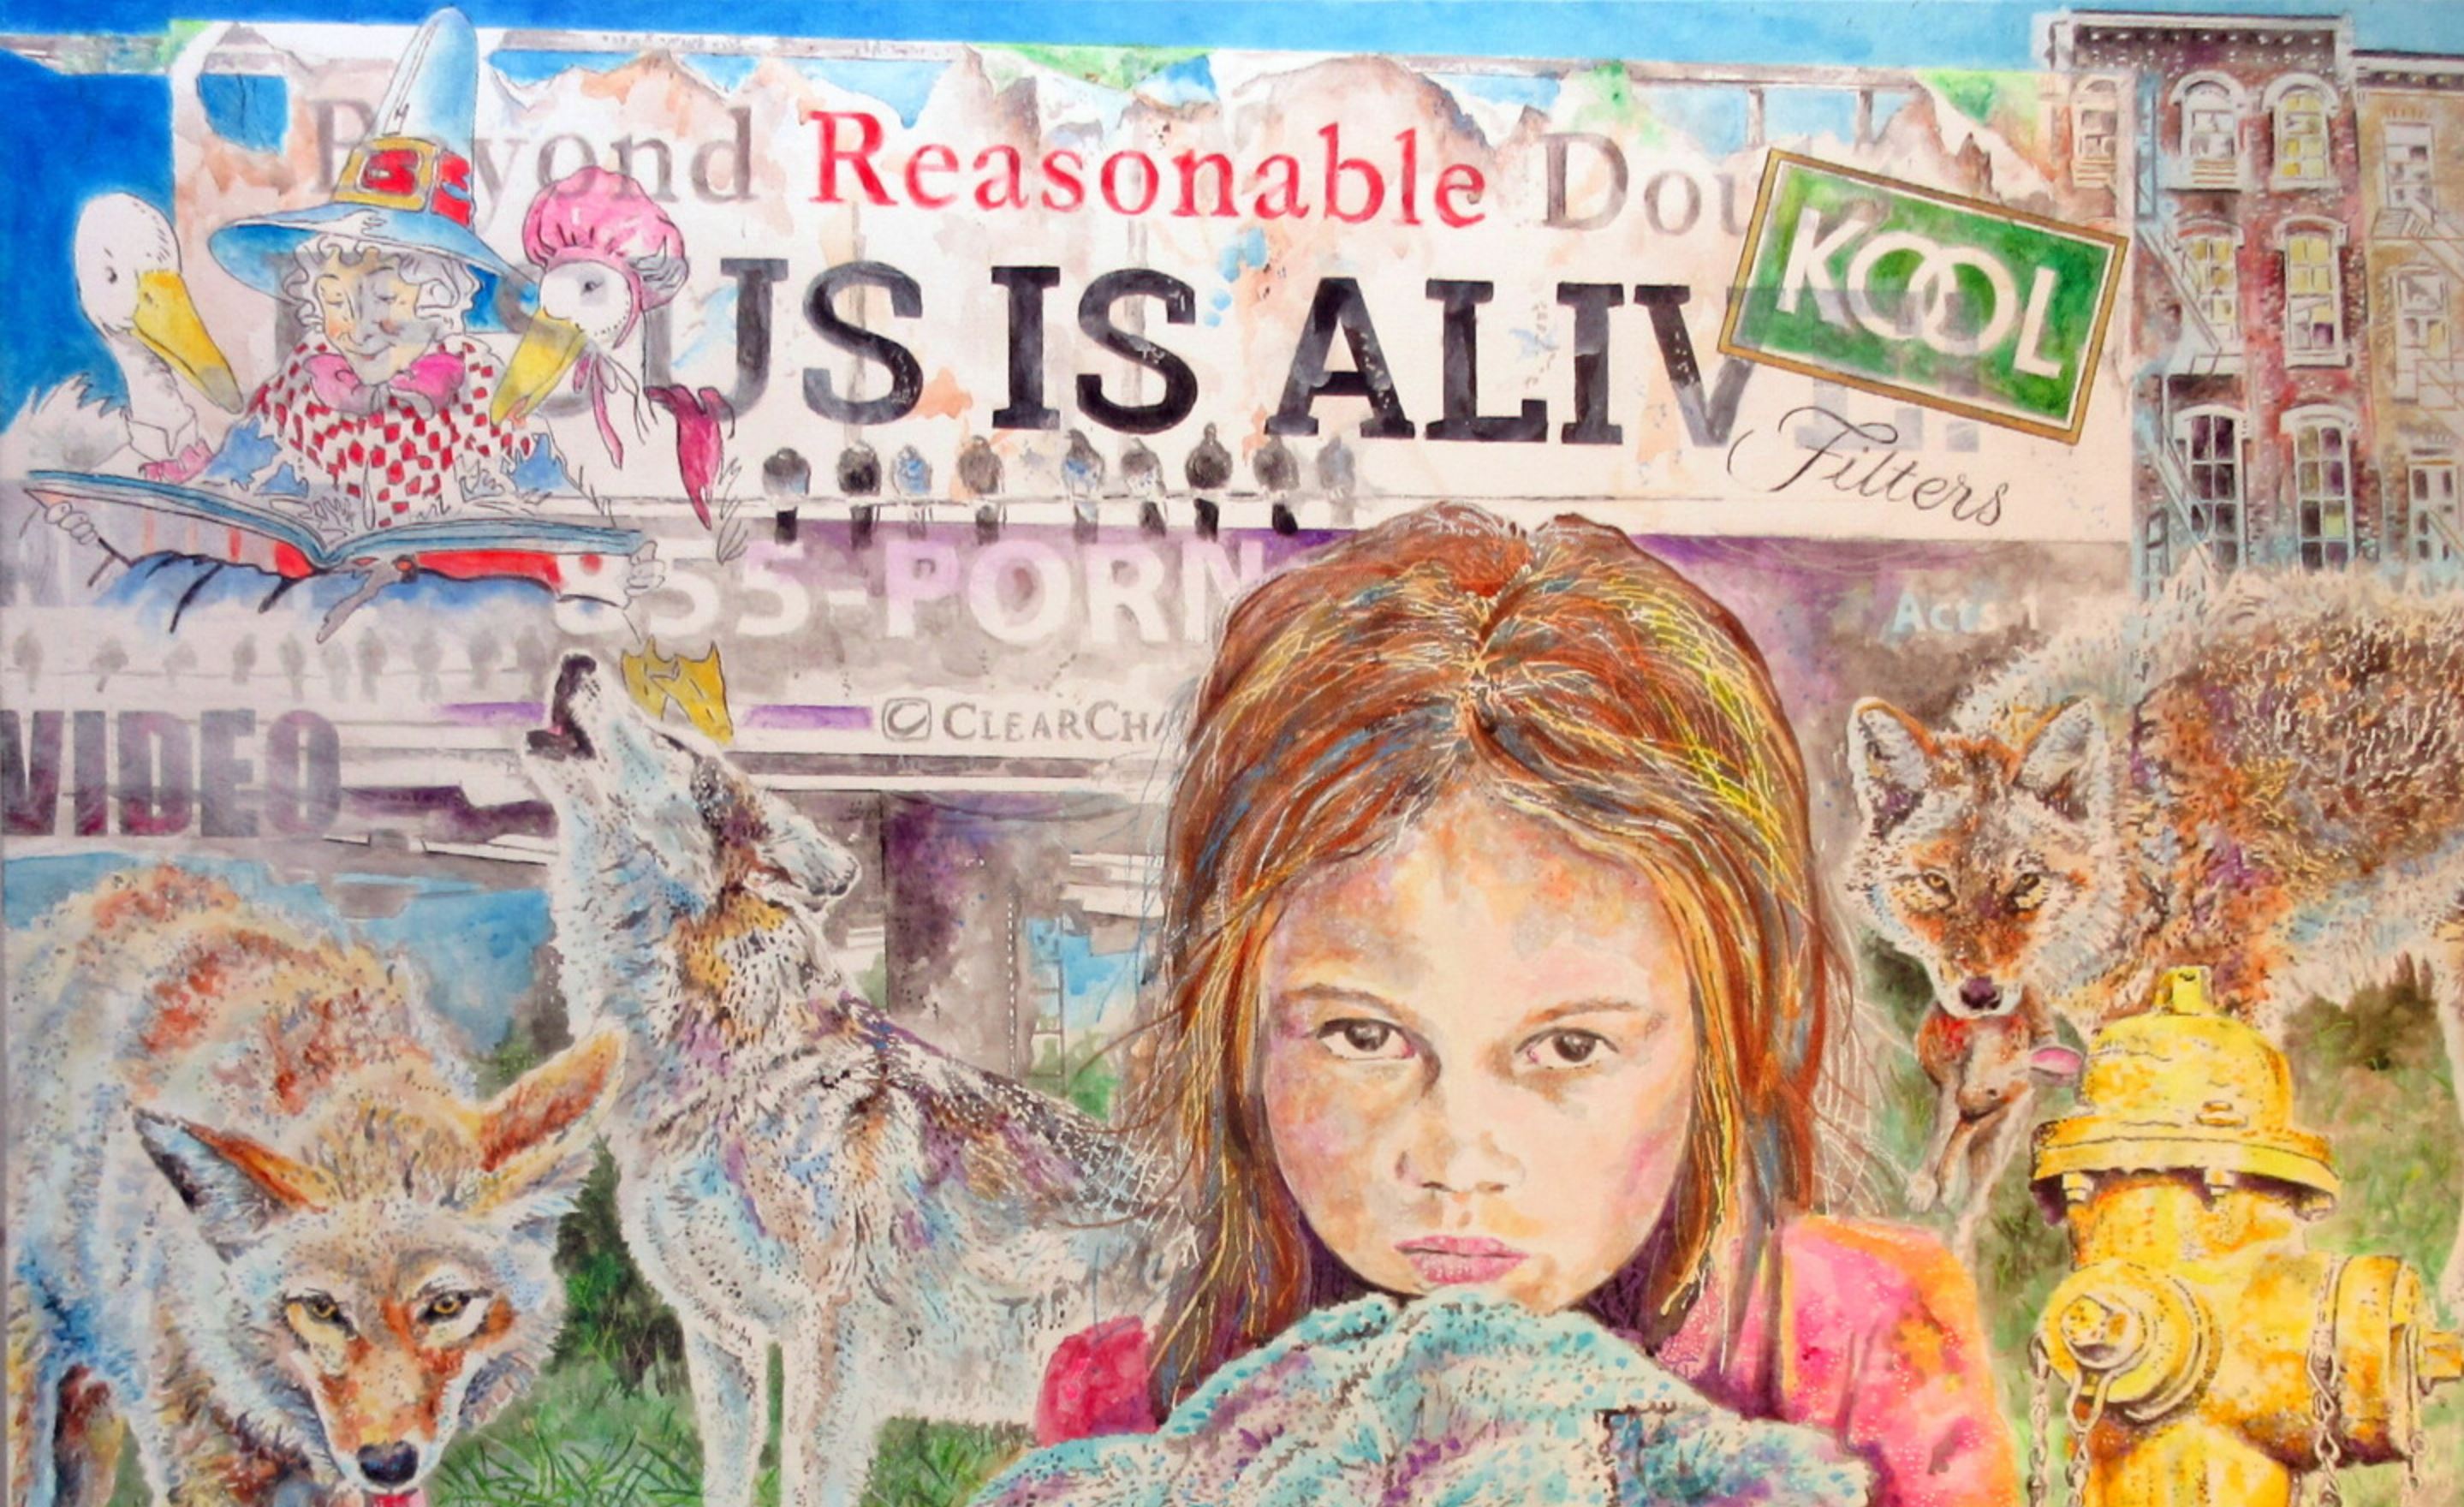 Randy Bennett Painting featuring a young girls animals and pop culture signage